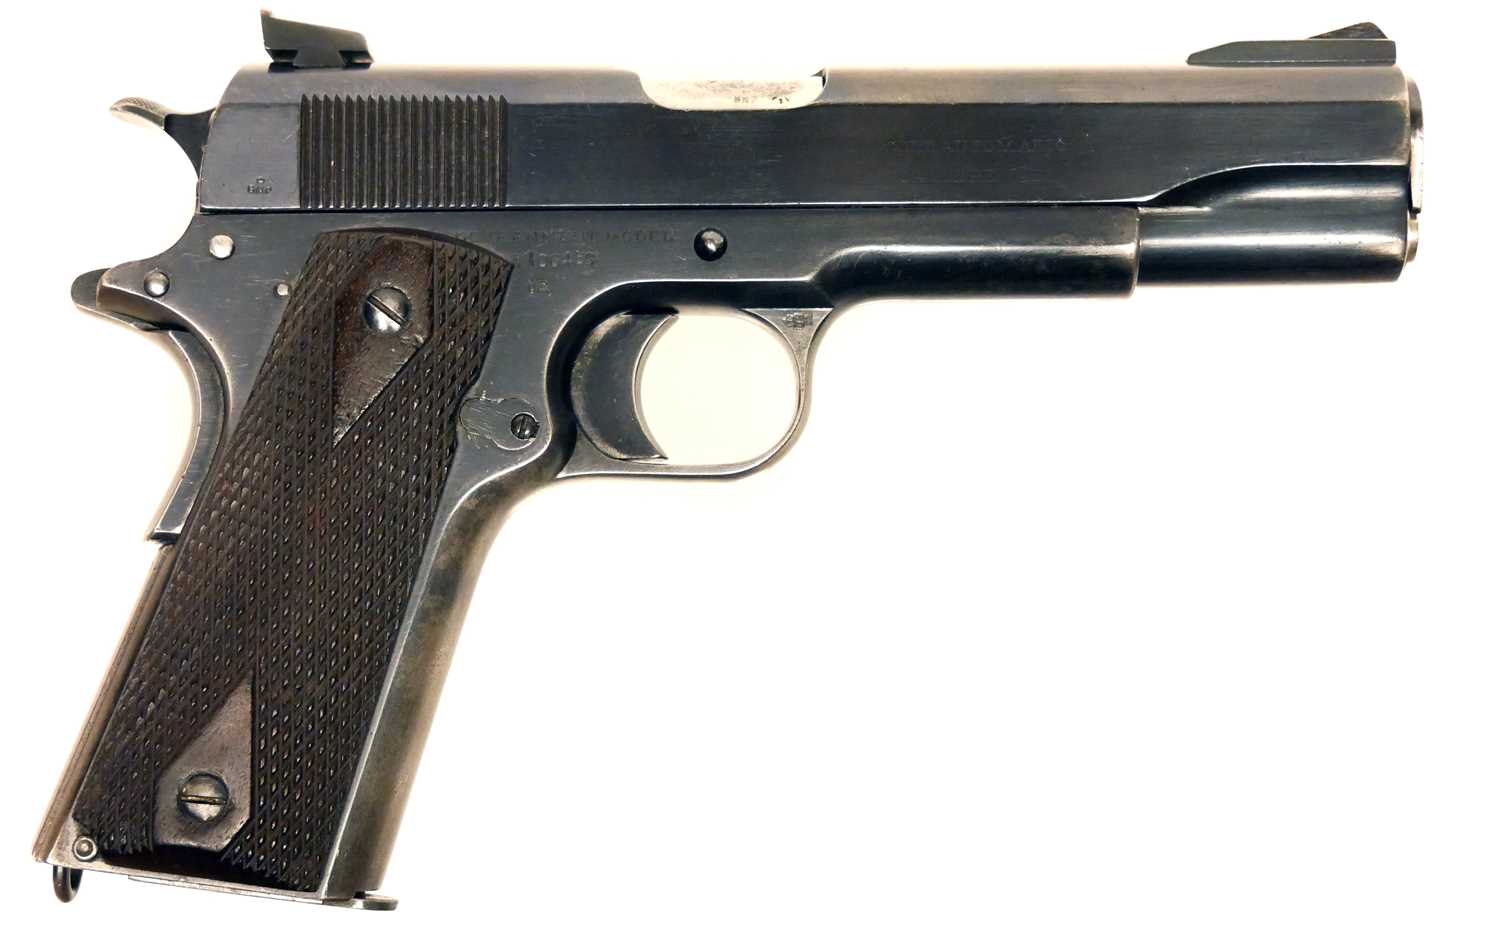 Colt 1911 RAF Contract .455 semi automatic pistol LICENCE REQUIRED